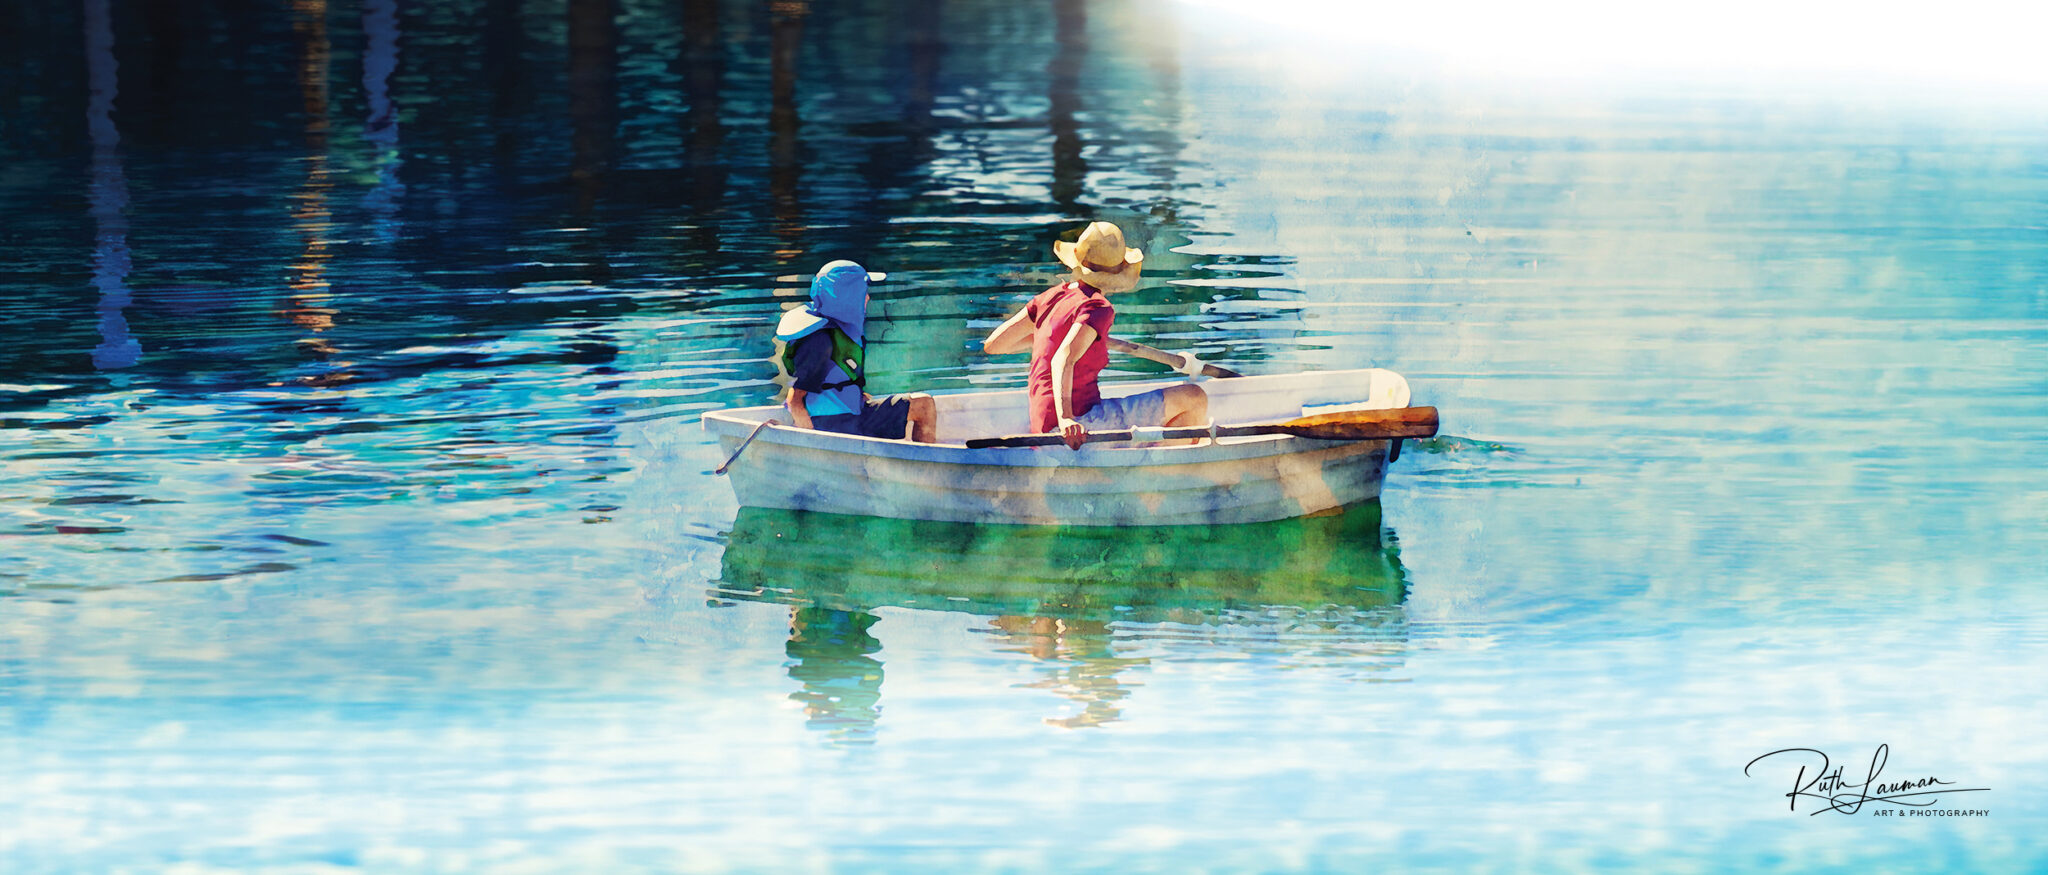 Afternoon Rowing, 33x14, digital artwork by Ruth Lauman, Art & Photography